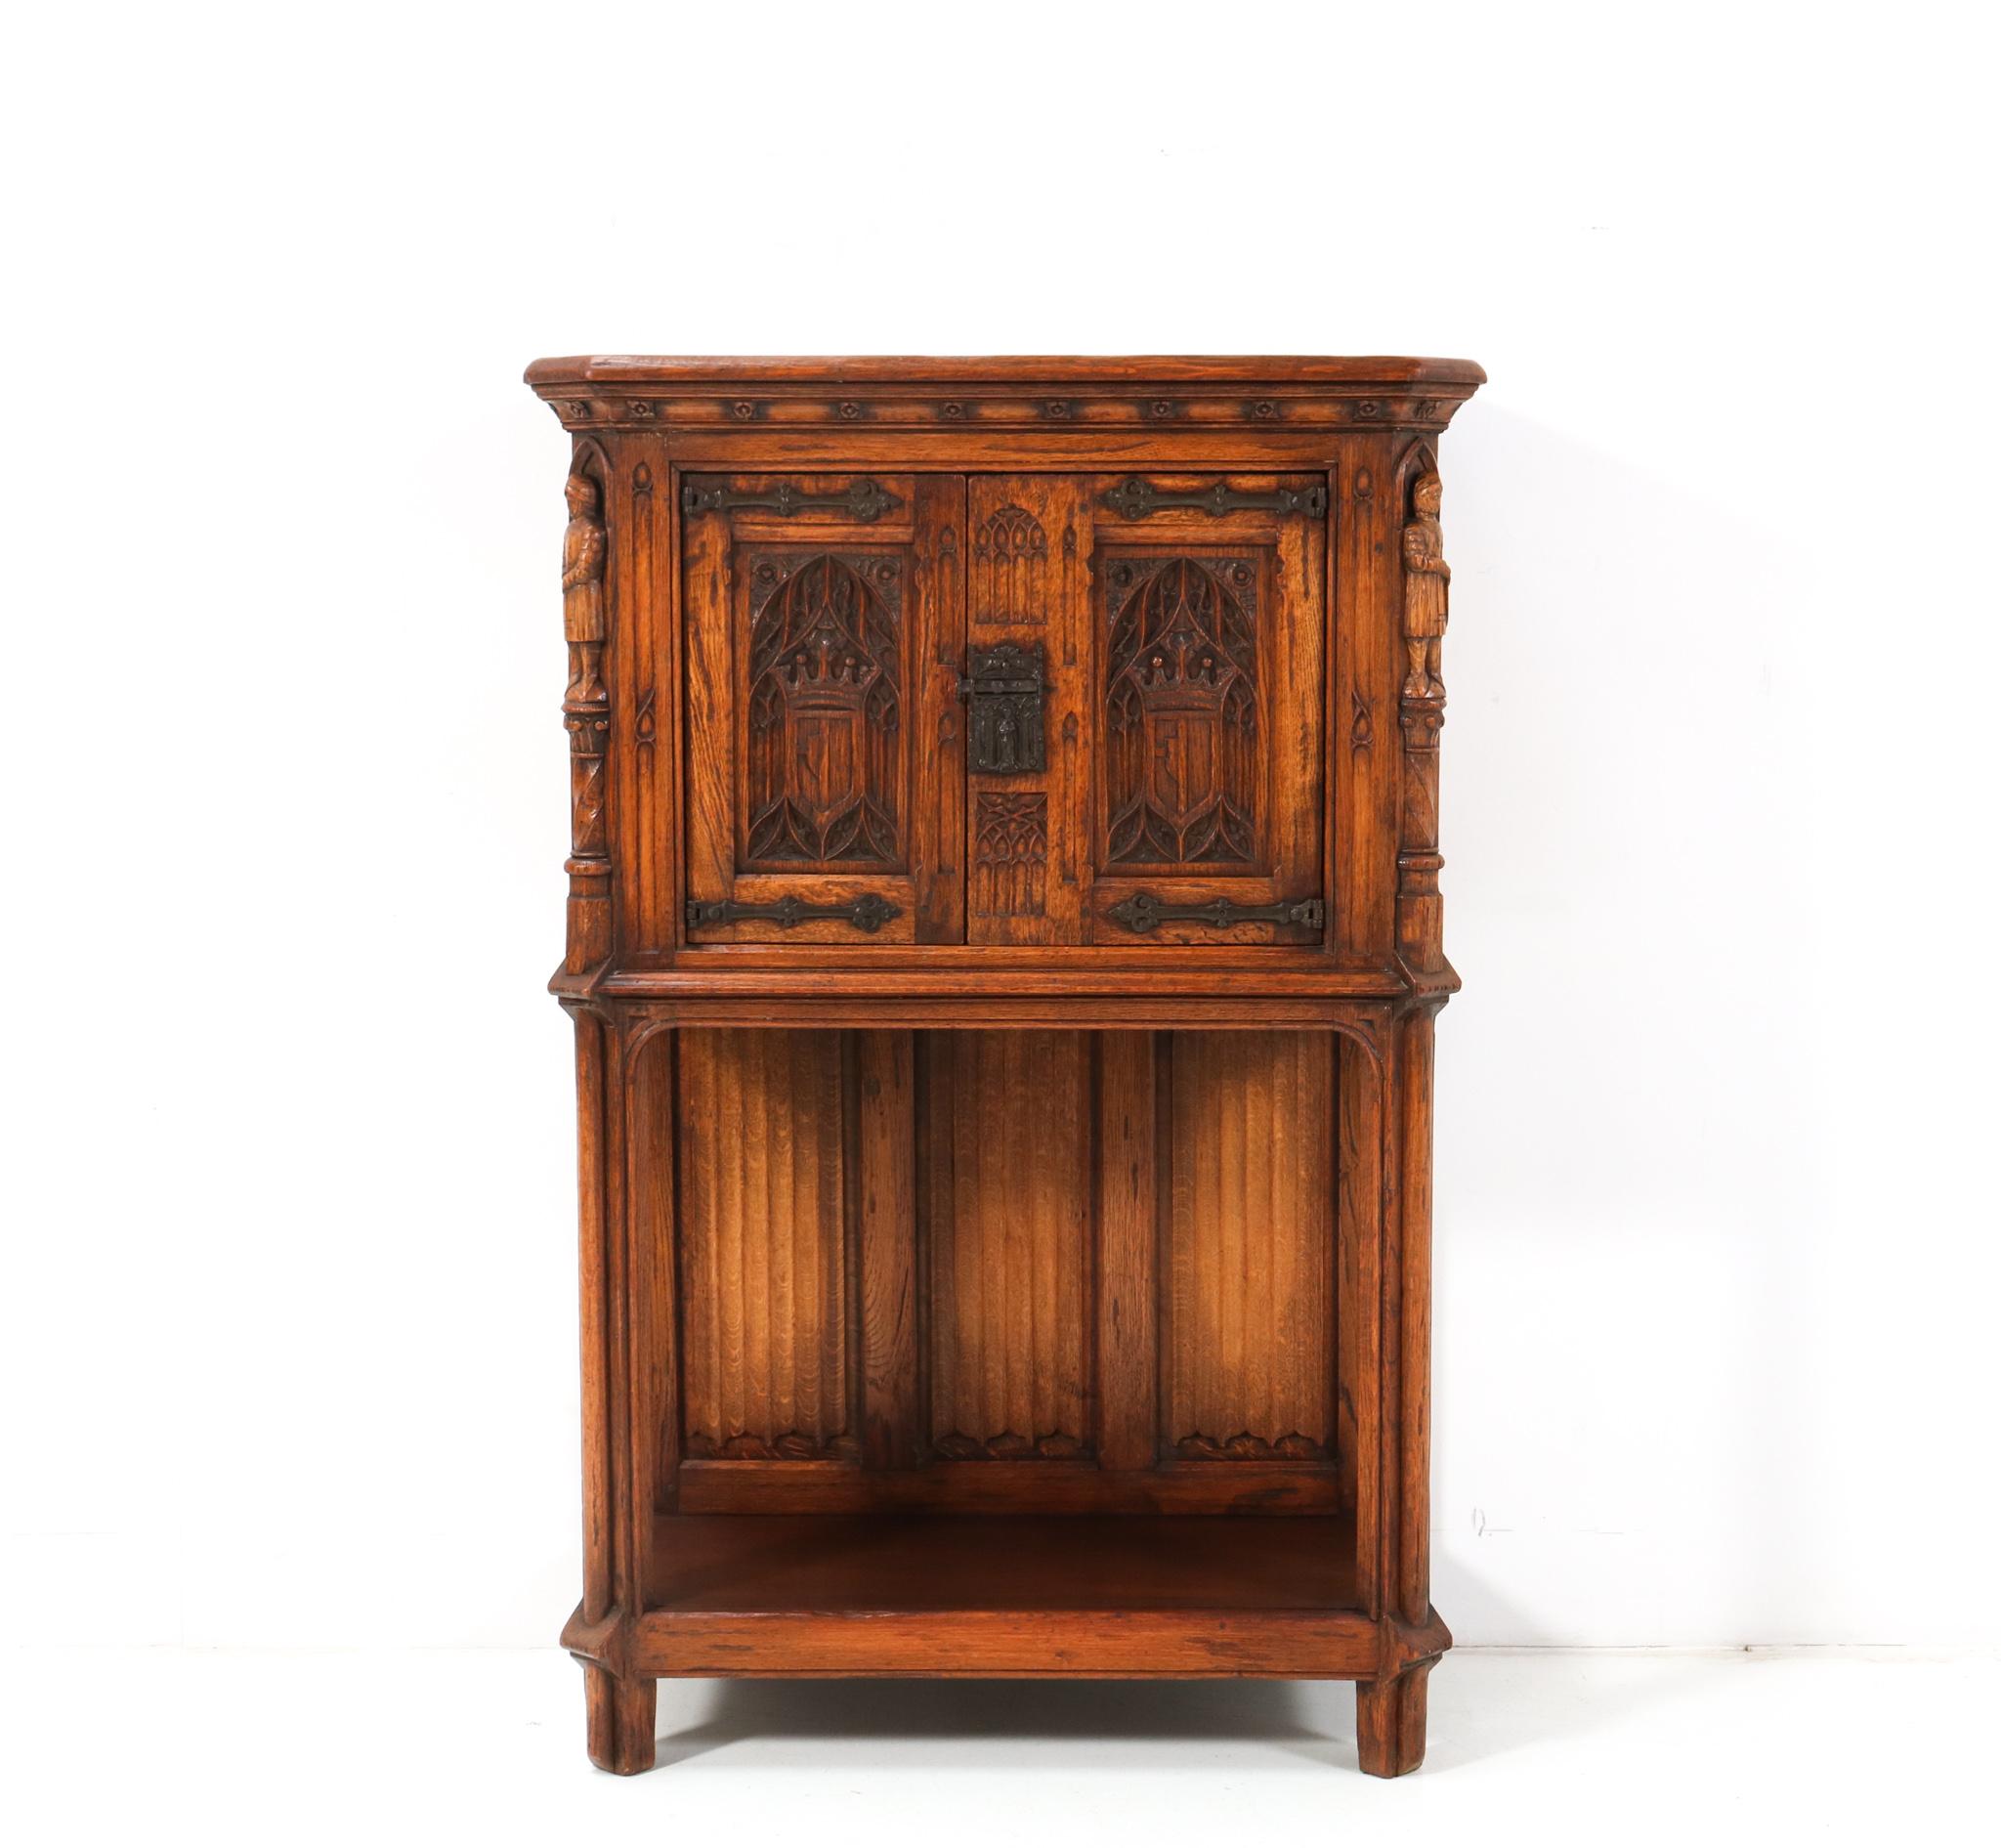 Magnificent and rare Gothic Revival wine bar or sacristy cabinet.
Striking Dutch design from the 1920s.
Solid oak with hand-carved knights and hand-carved panels in the door.
This wonderful Gothic Revival wine bar or sacristy cabinet is in very